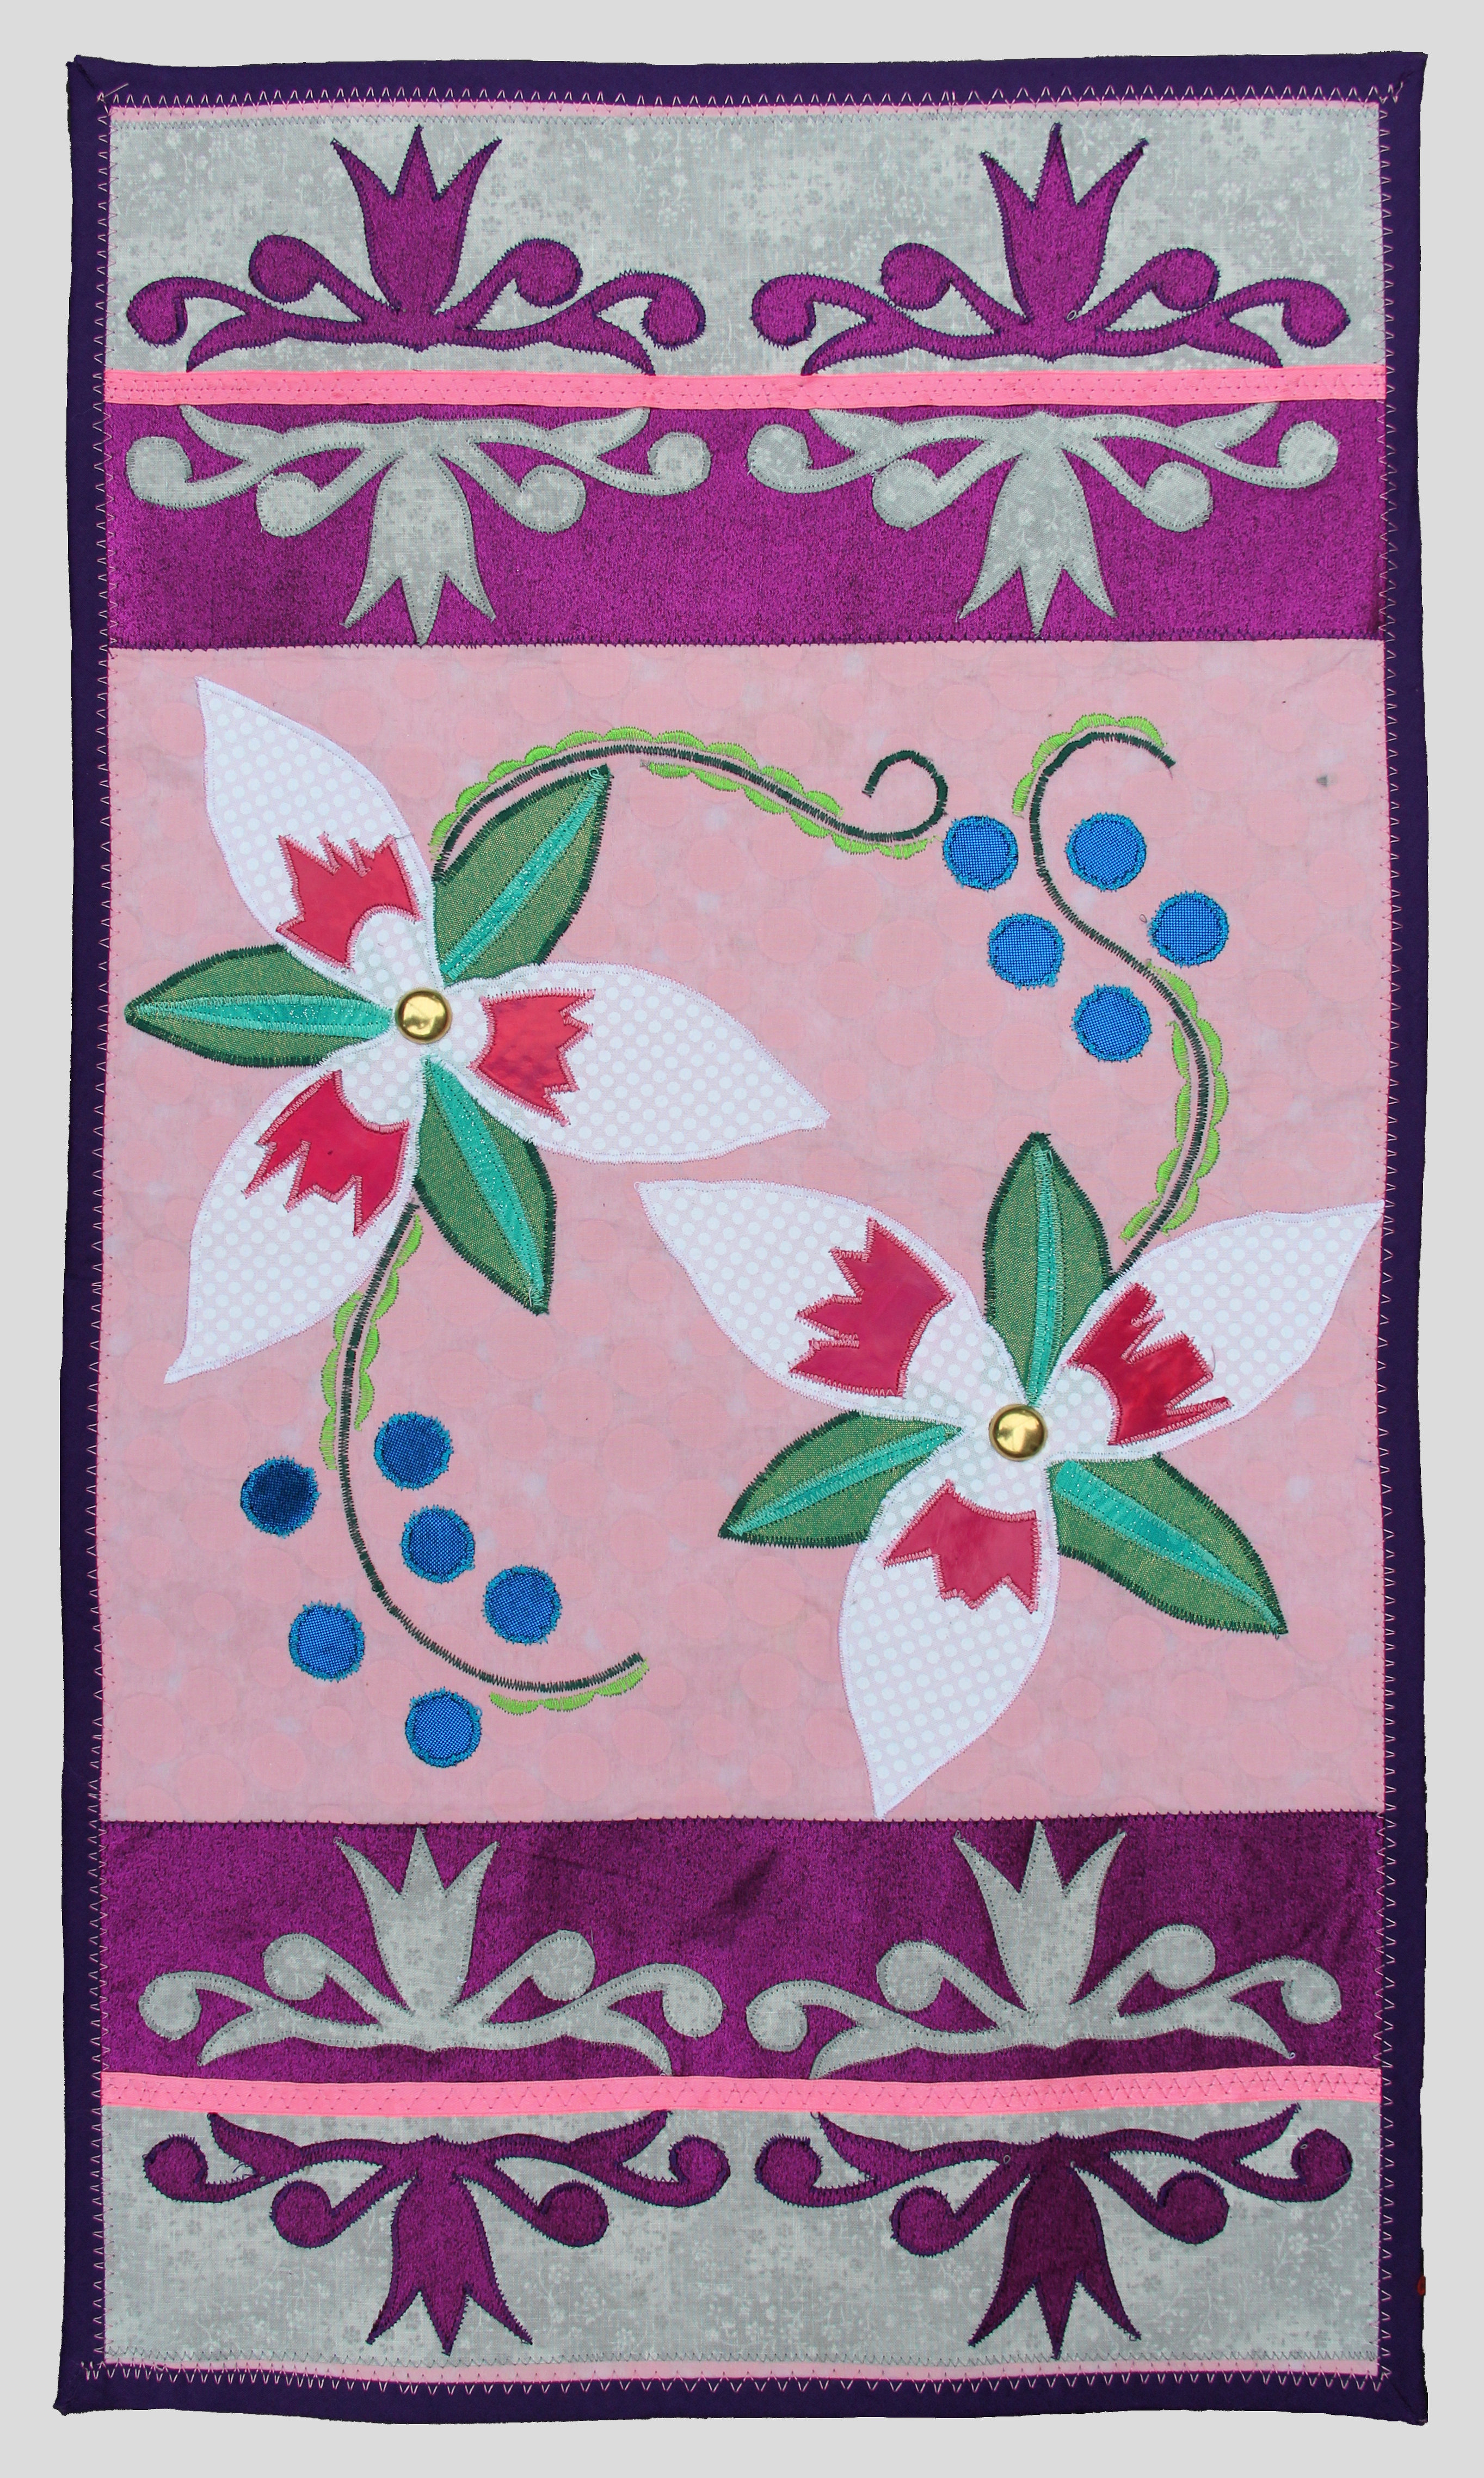 A rectangular textile hand made by Angela Waupochick for the Nisinoon project, displaying a top-down view of two trillium flowers at opposite corners of a pink square in the center, bordered by side views of two trillium flowers along the top and bottom. Photo by Rodney Schreiner.